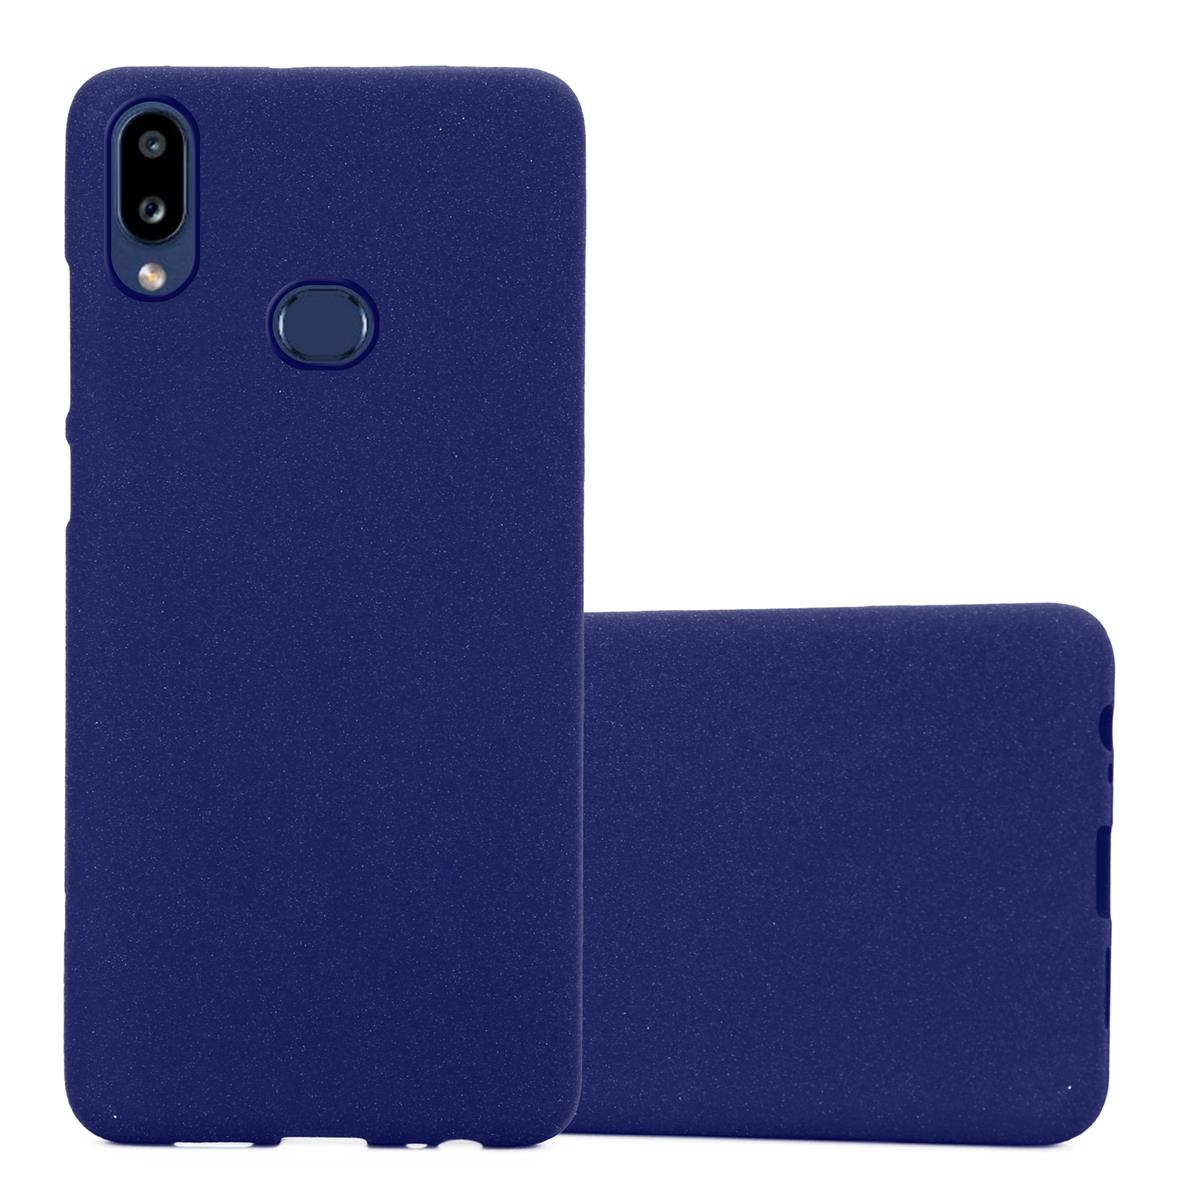 BLAU Backcover, Frosted A10s Schutzhülle, FROST CADORABO / Galaxy TPU Samsung, DUNKEL M01s,